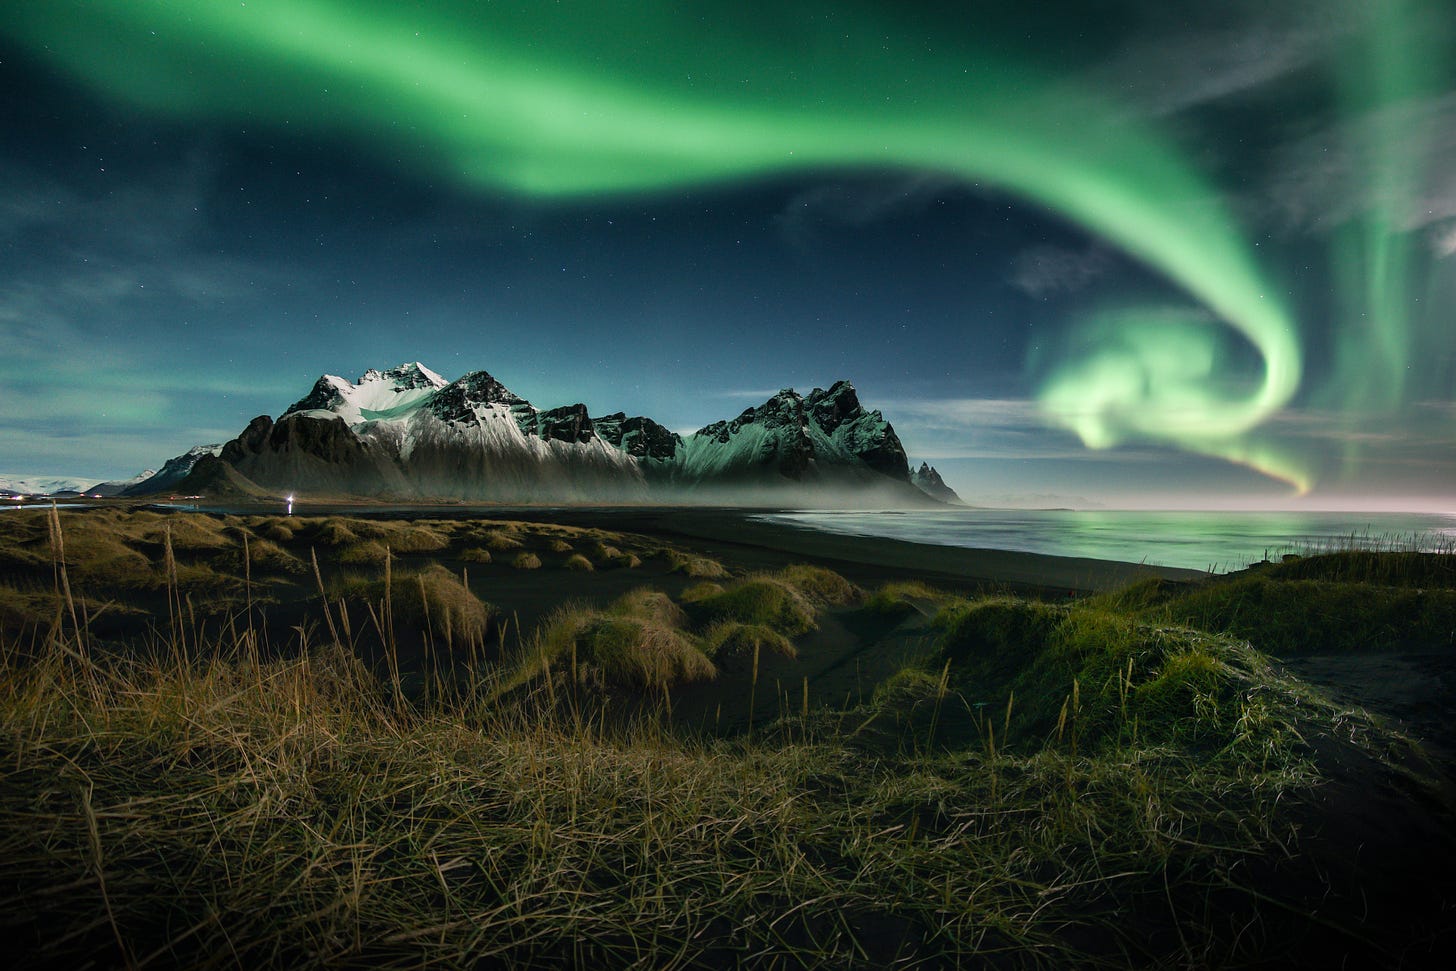 Mountain and gorgeous curling green lights all around in the sky